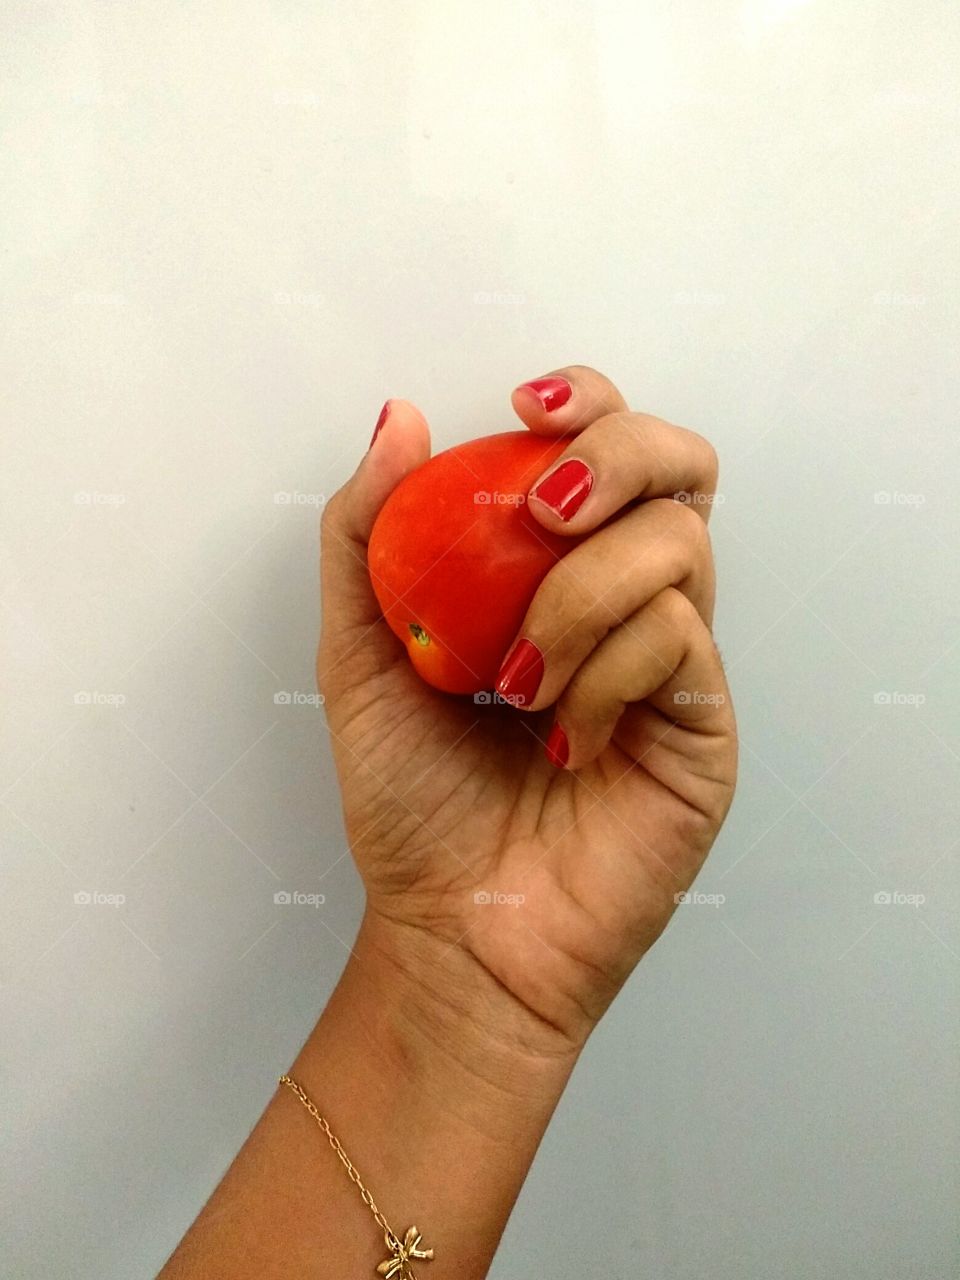 #holdingfood #color #red #tomato